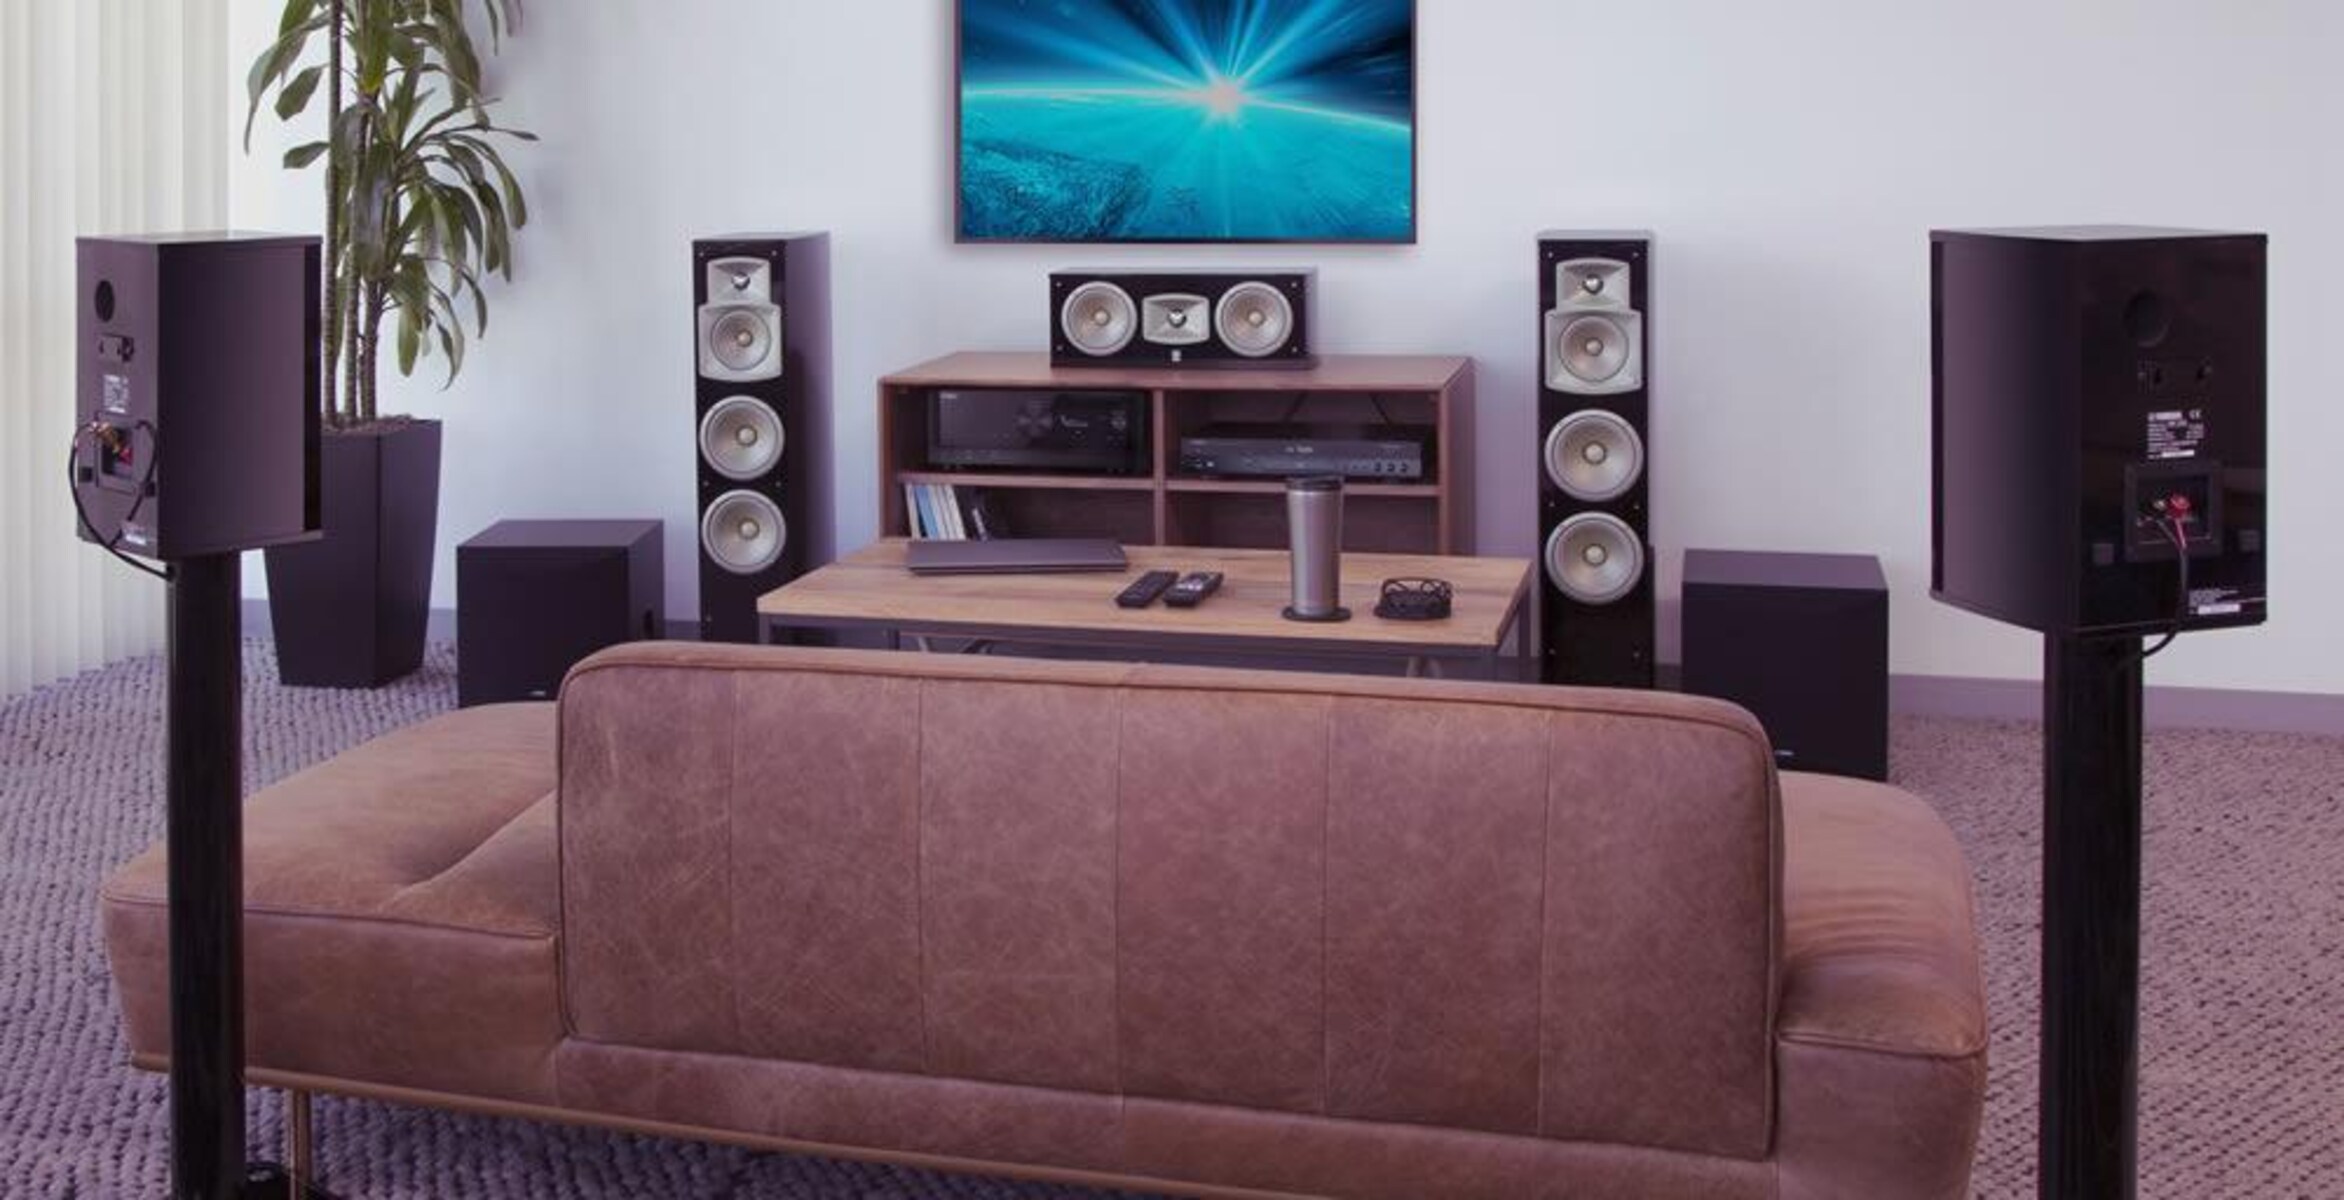 How To Connect Yamaha Surround Sound System To TV